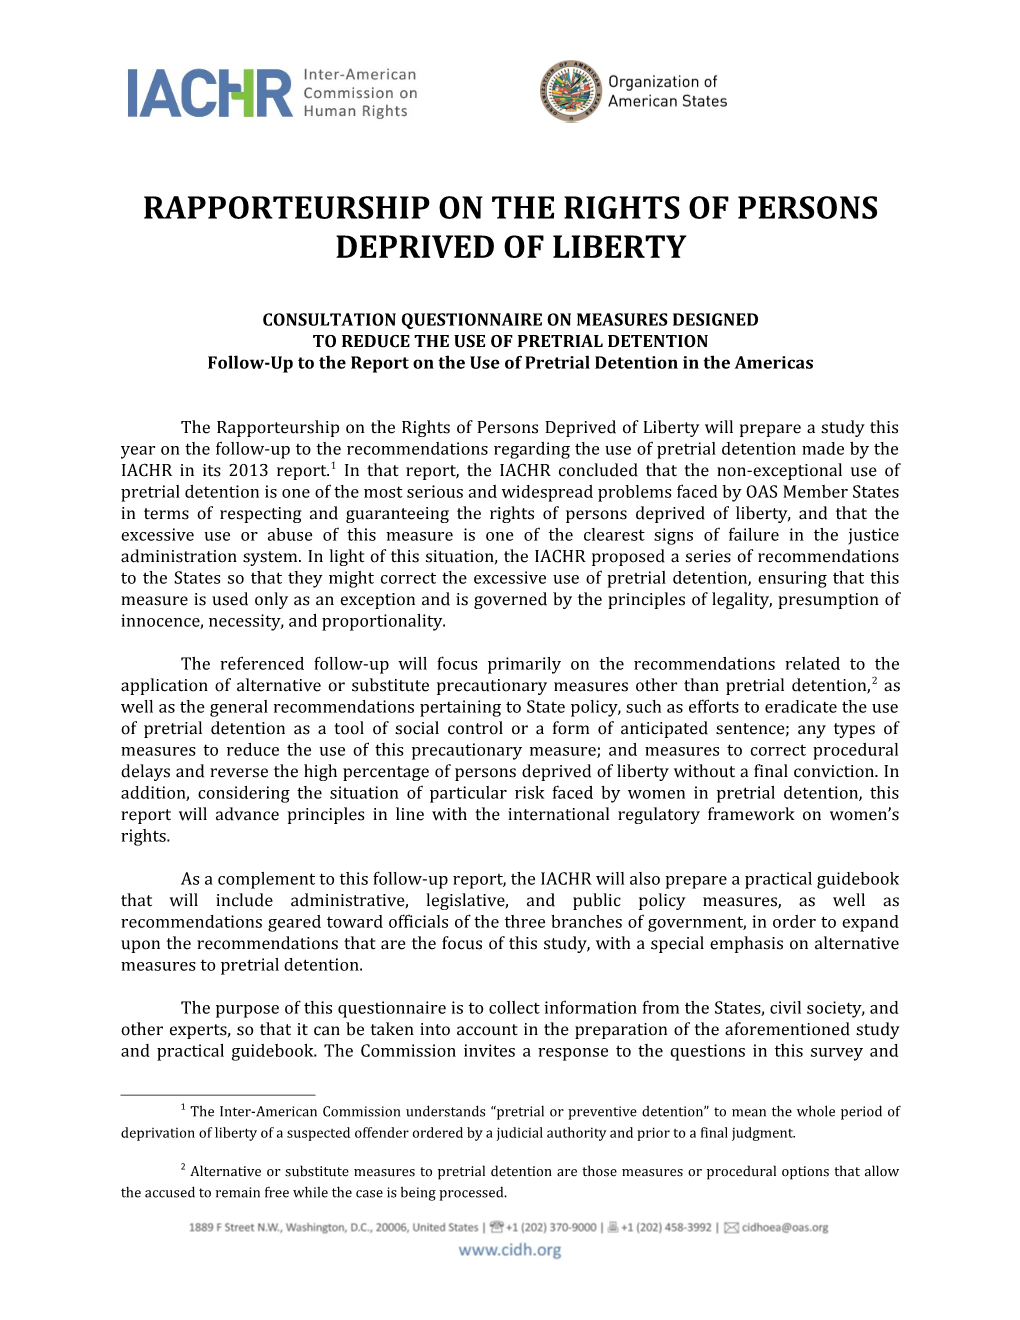 Rapporteurship on the Rights of Persons Deprived of Liberty